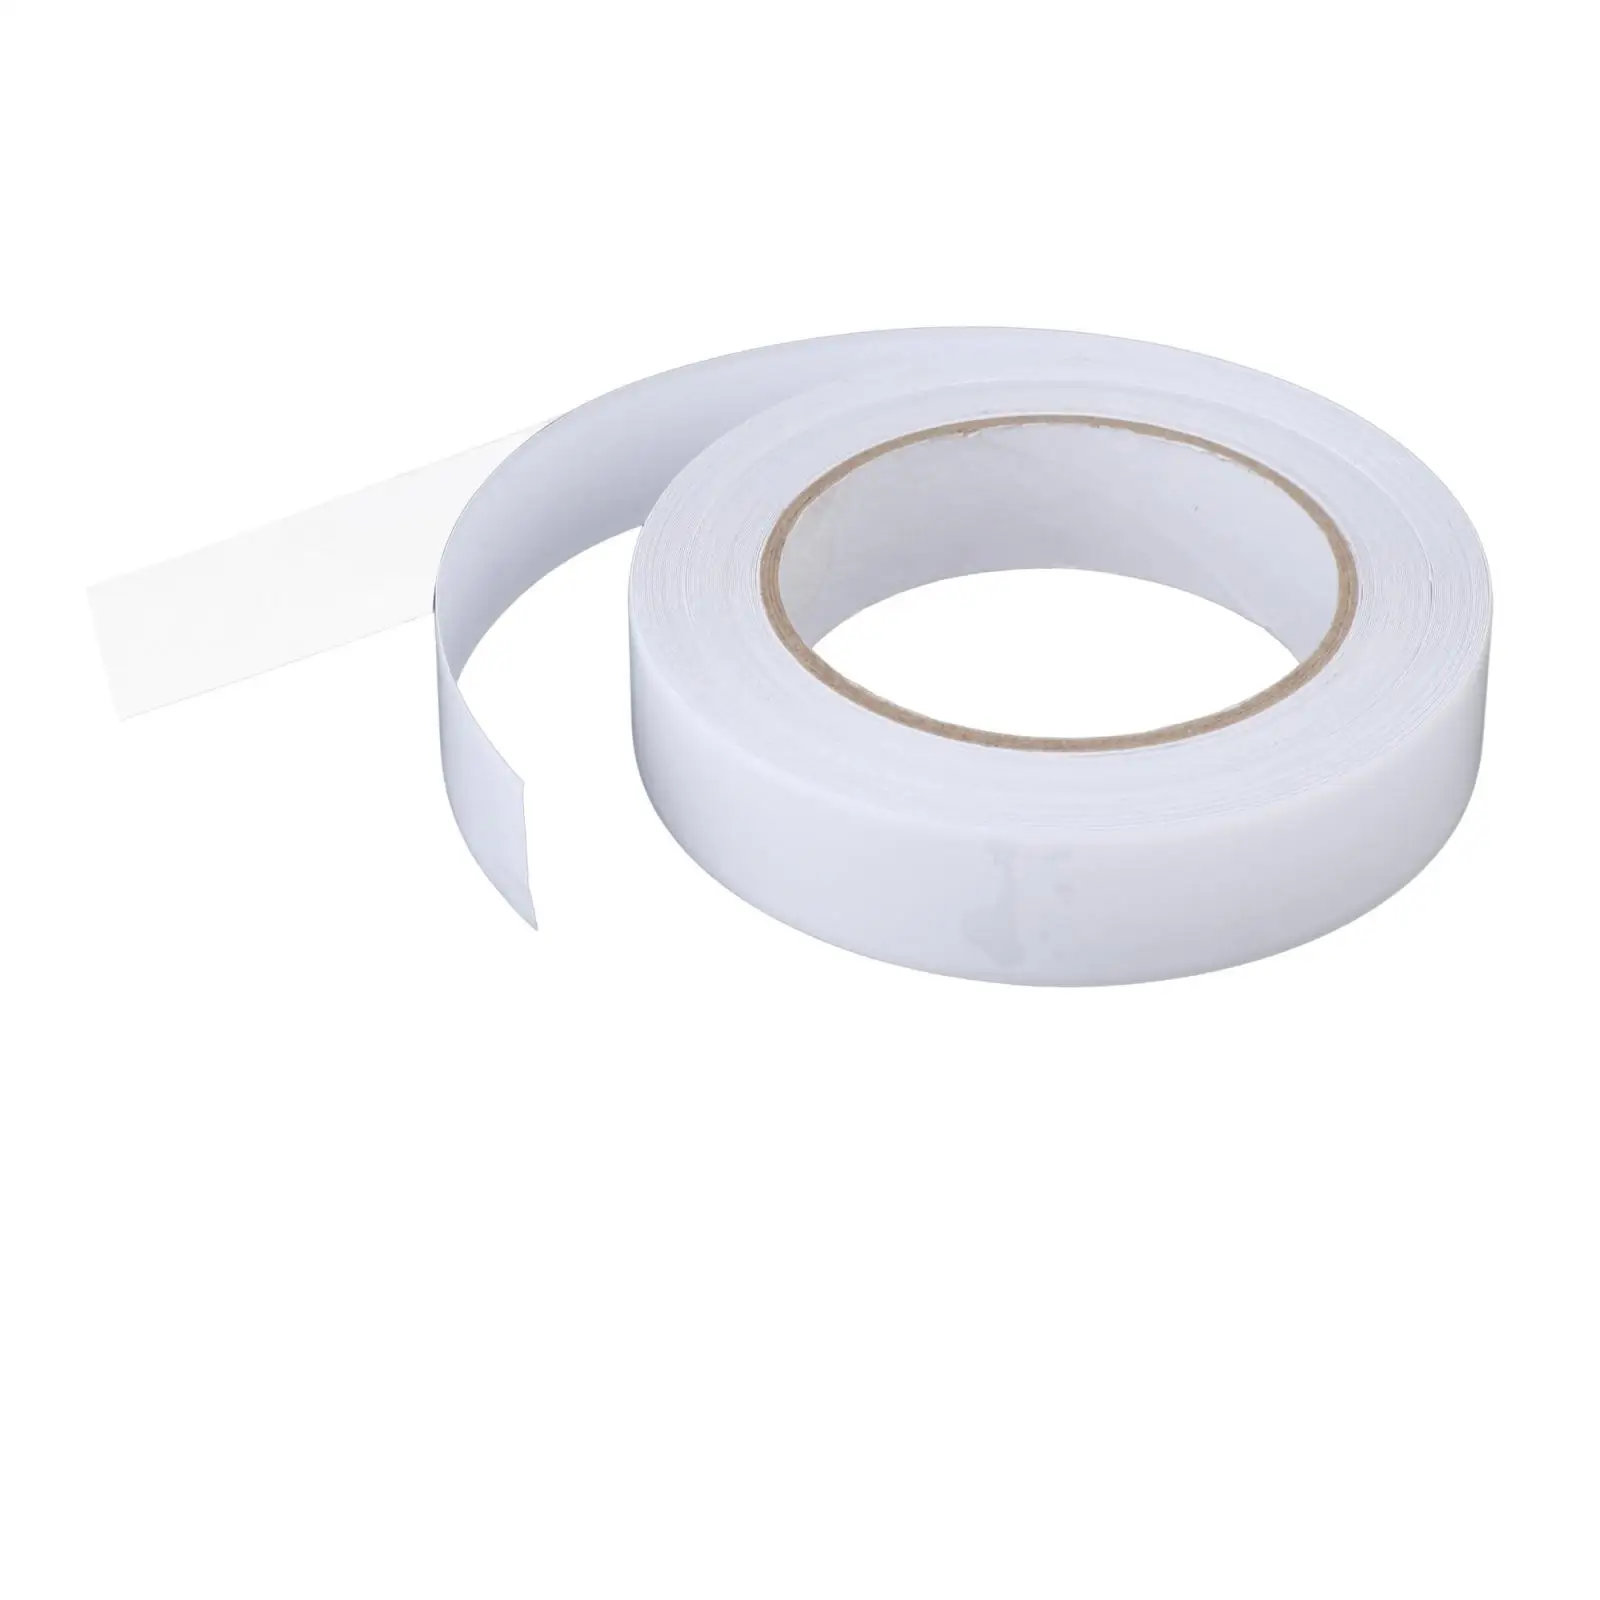 Swimming Rings Repair Tape Durable Awning Tent Self Adhesive Waterproof Cover Patch Pool Patch for Inflatable Toys Trampoline